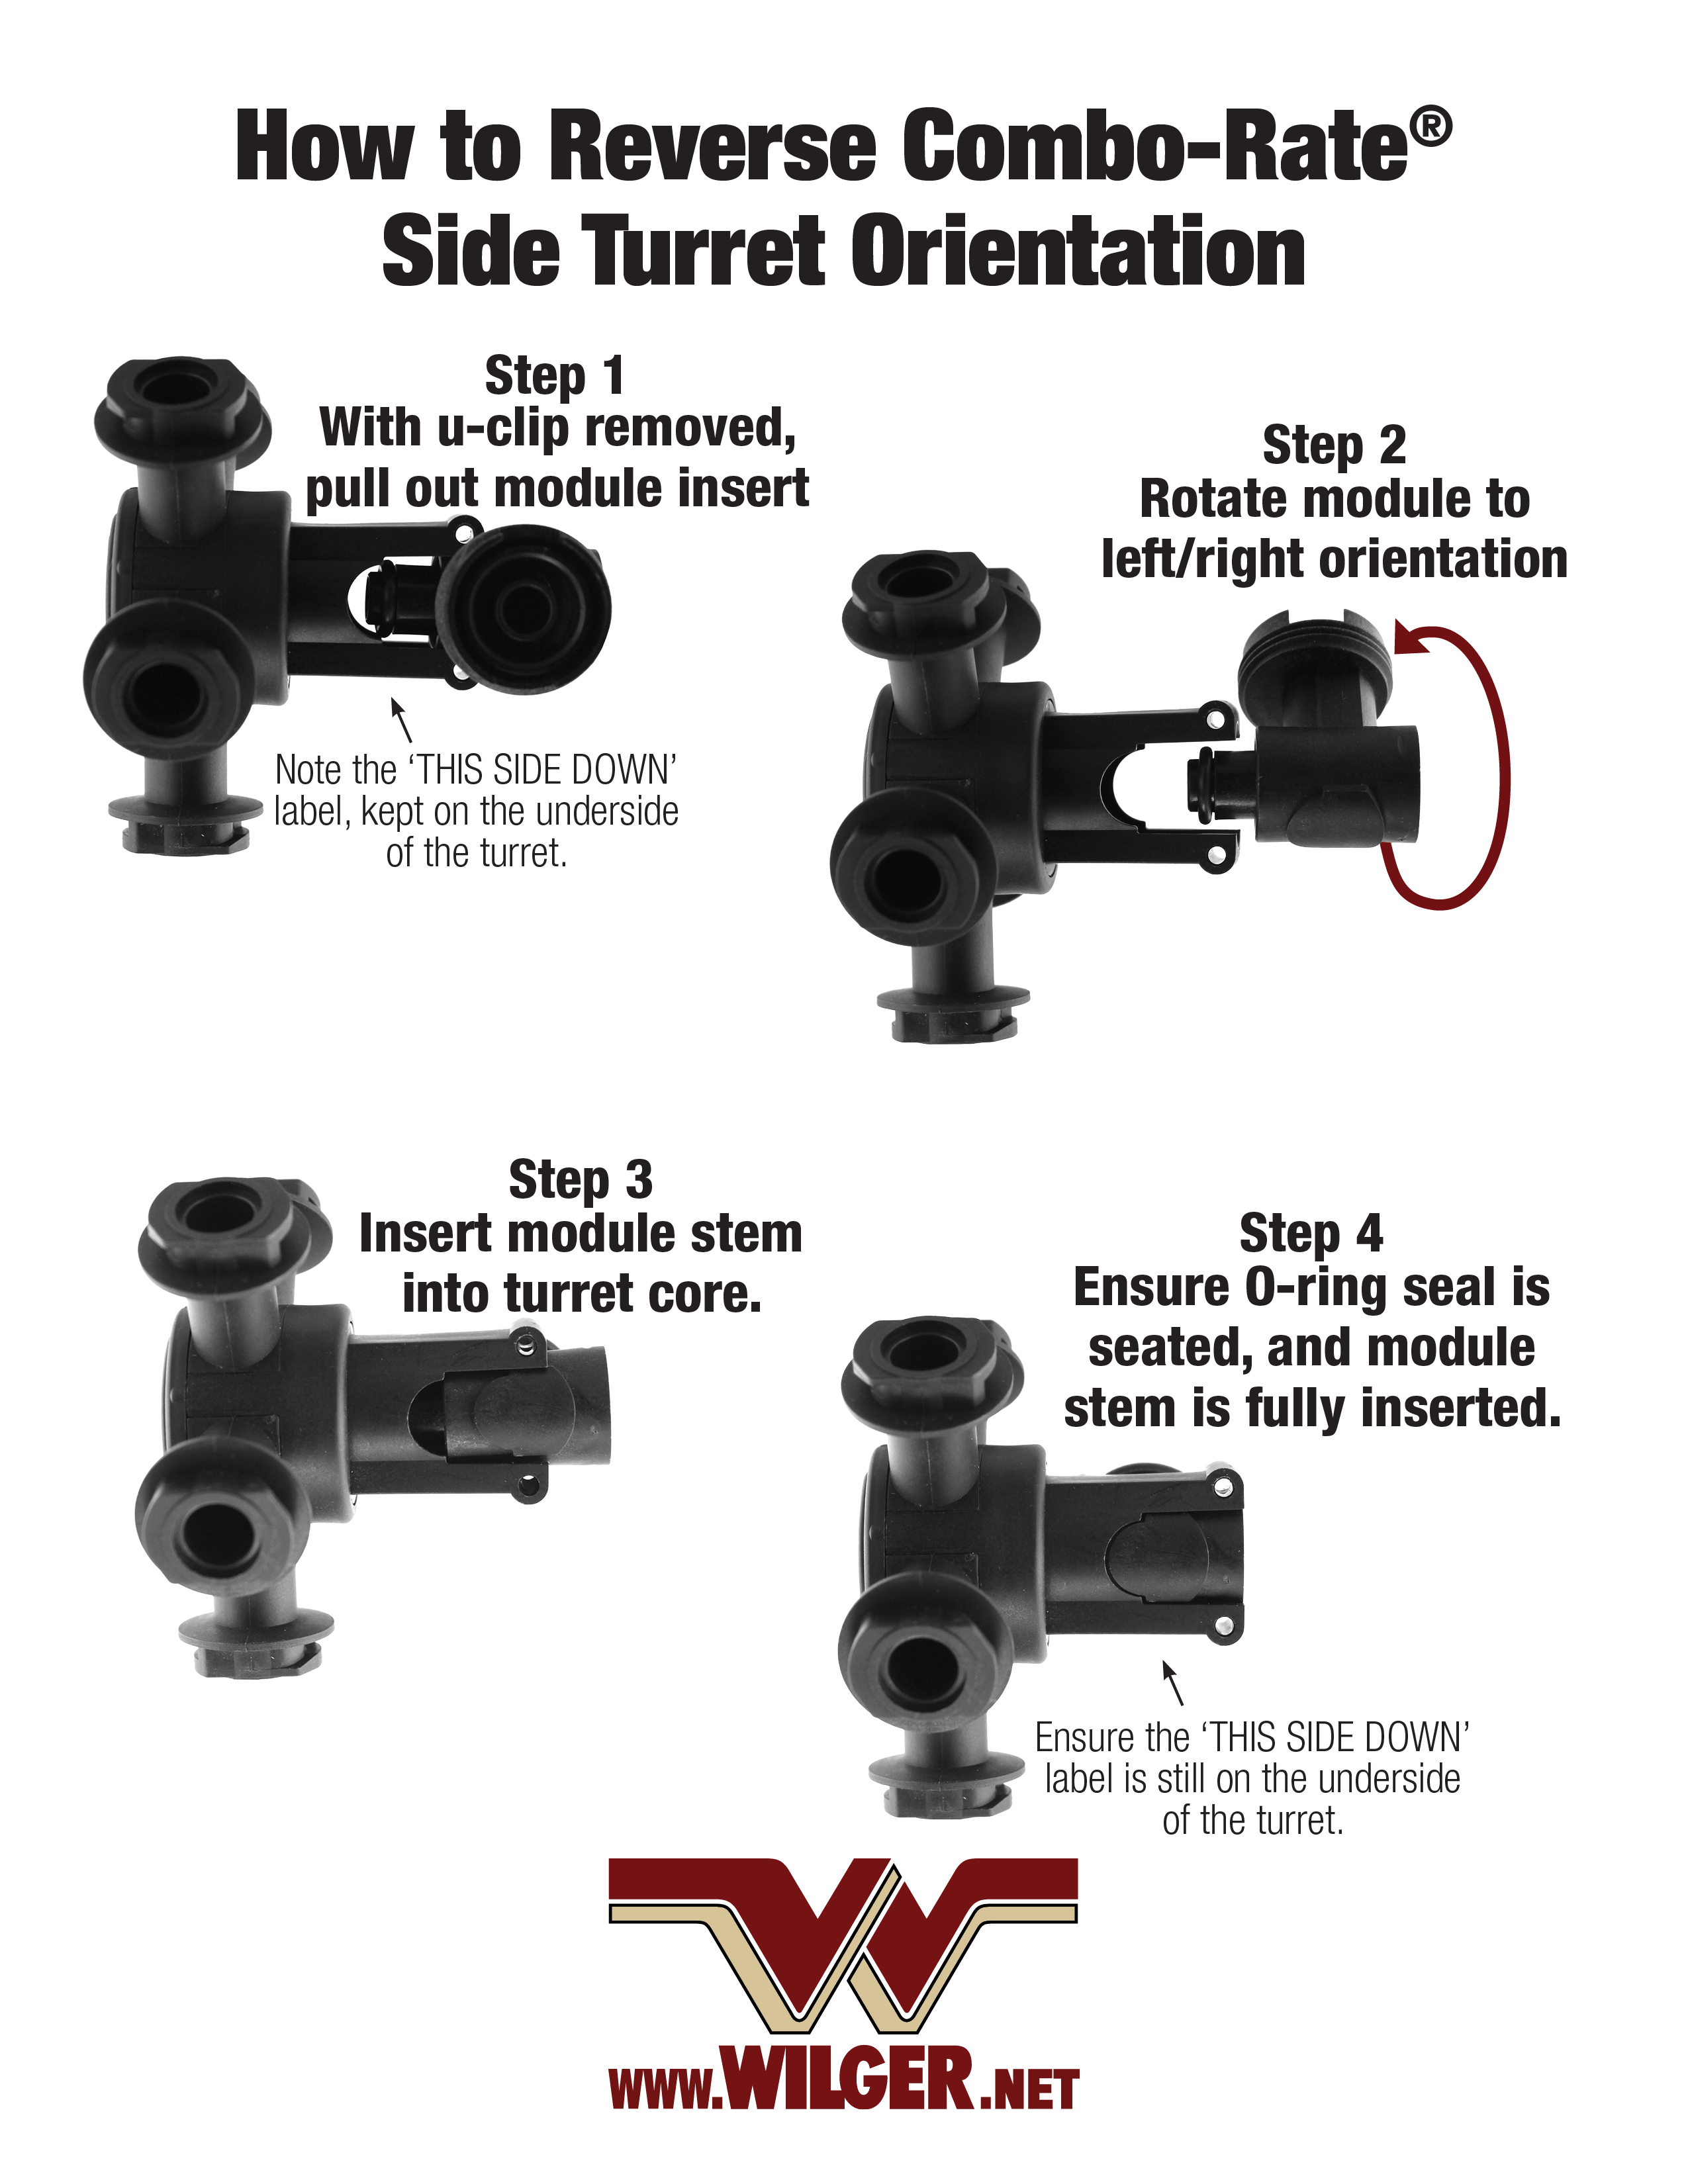 Combo-Rate® Side Take-Off Turret Reversal Instructions